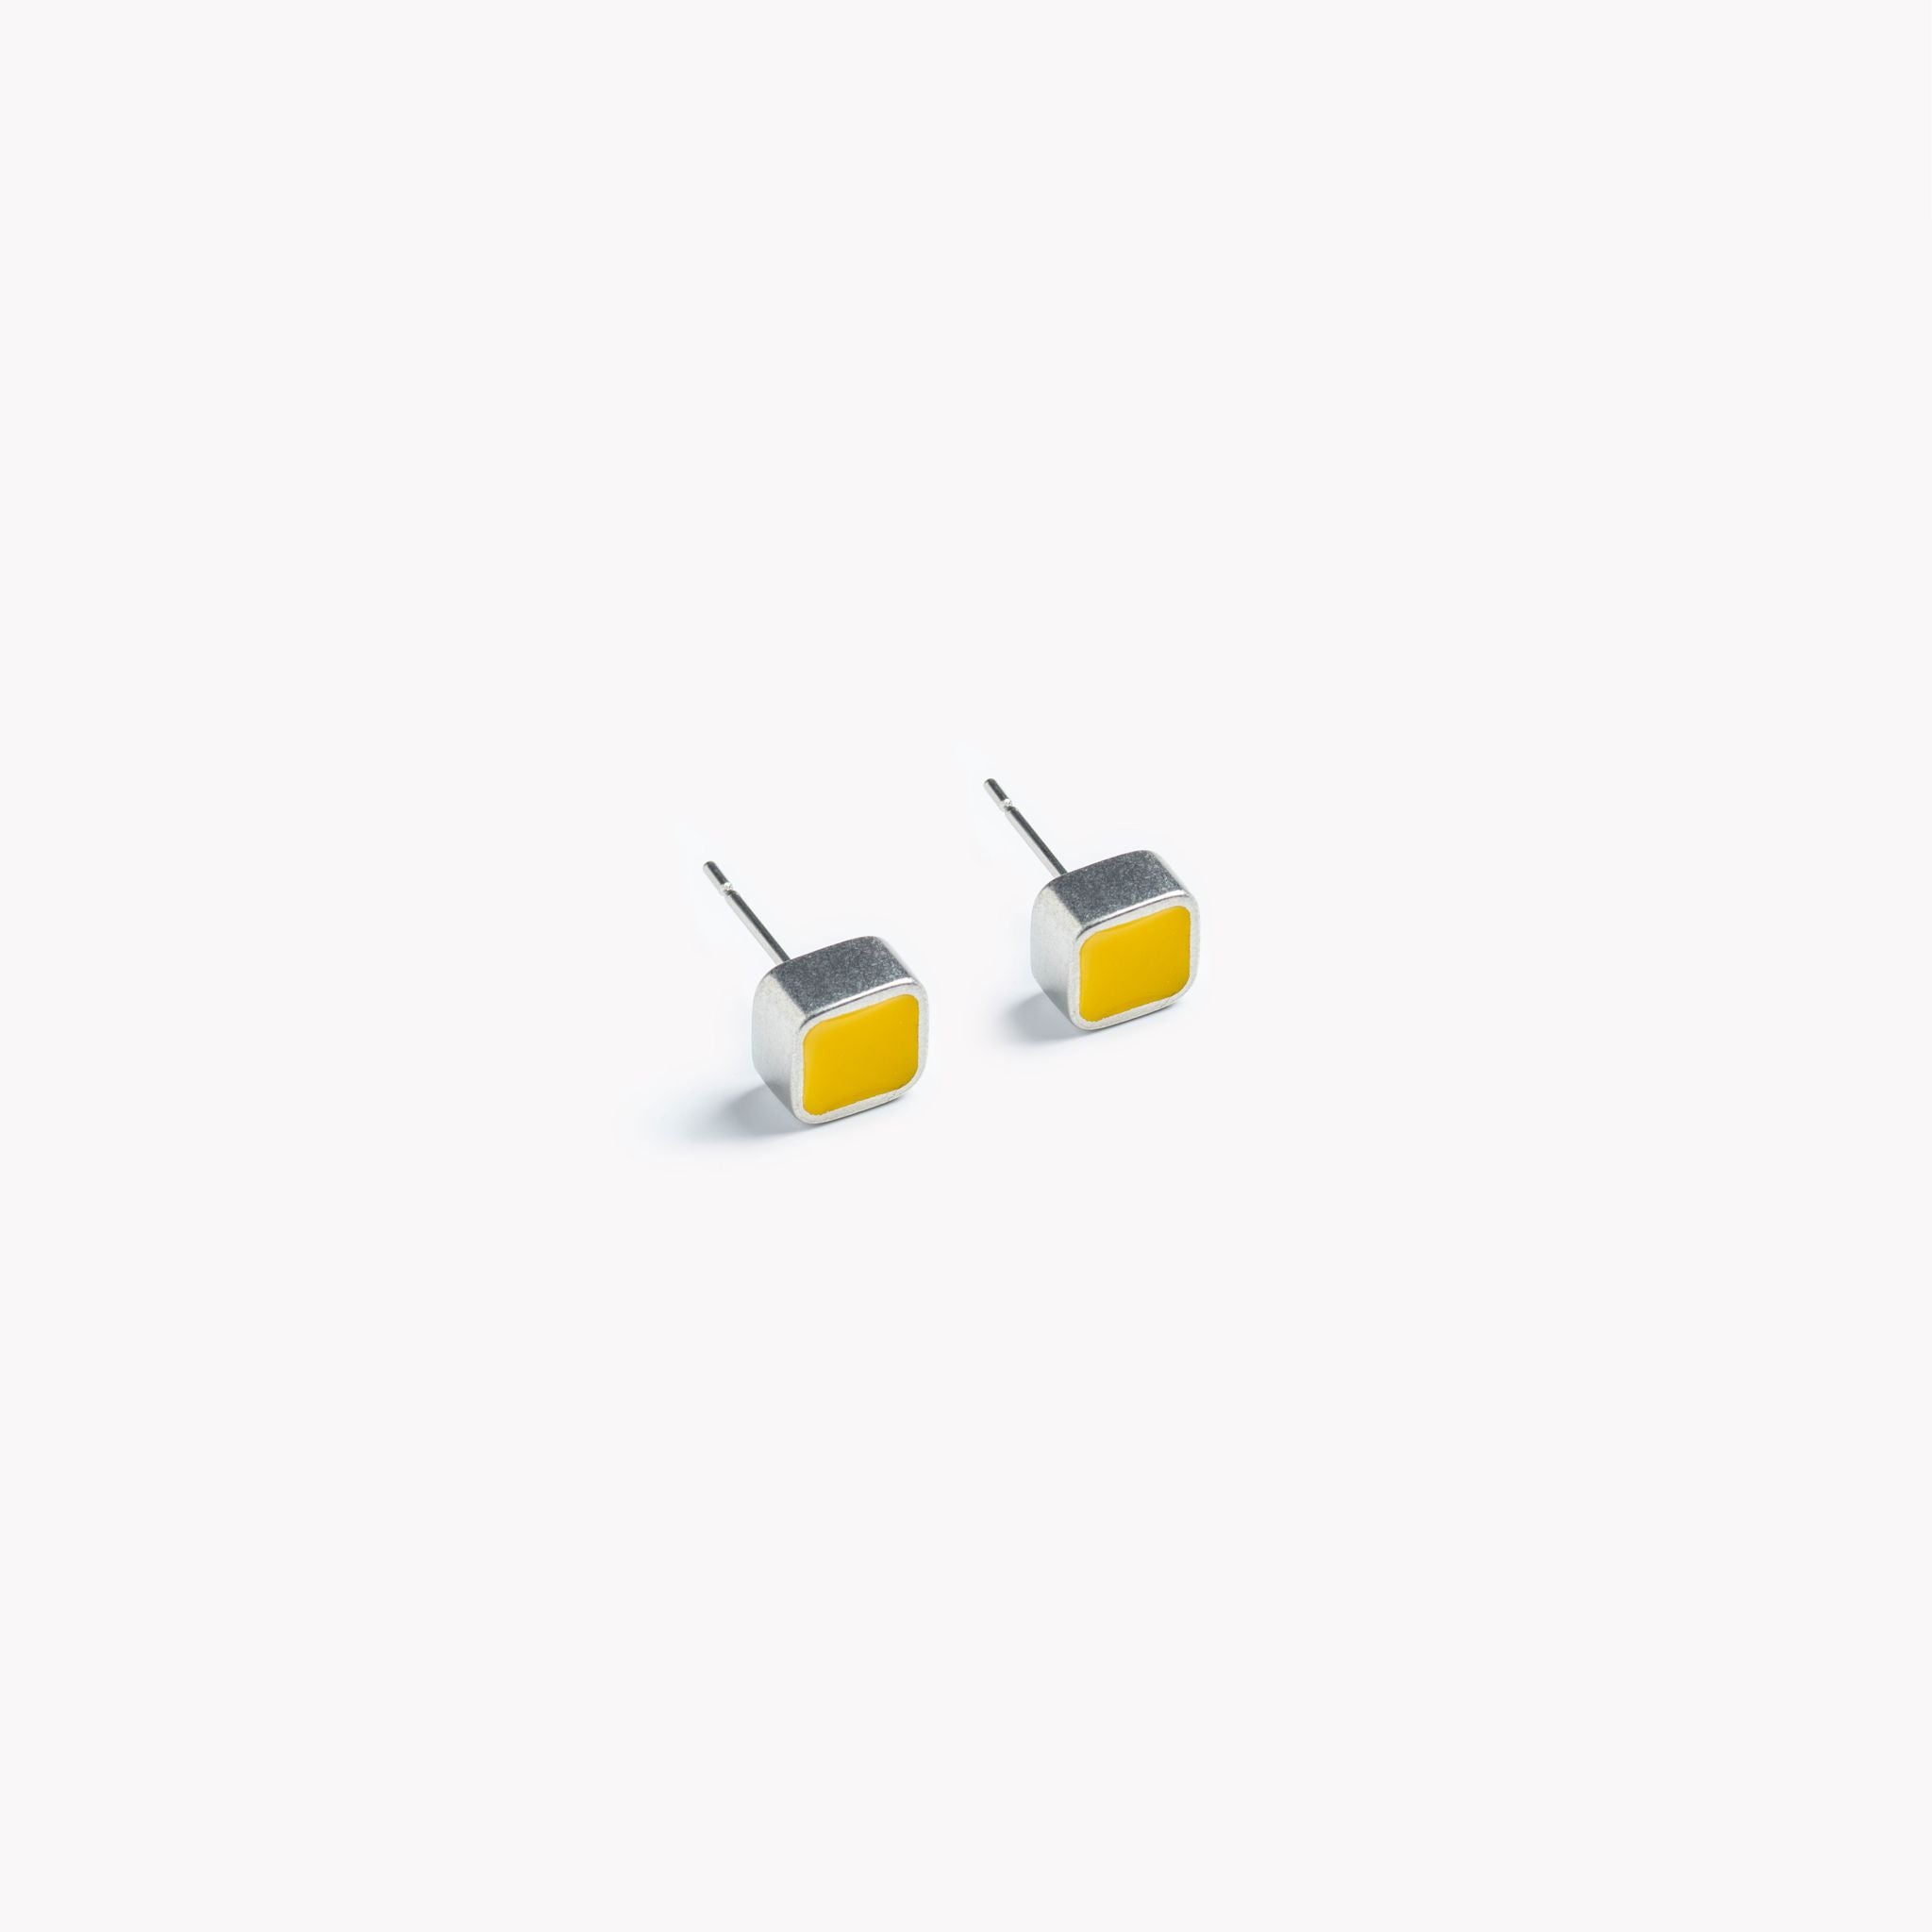 Yellow cube and square stud earrings, pewter ear studs, colourful and rounded, bright yellow, silver tone, modern, simple, minimal design, handmade in Wales from recycled tin.